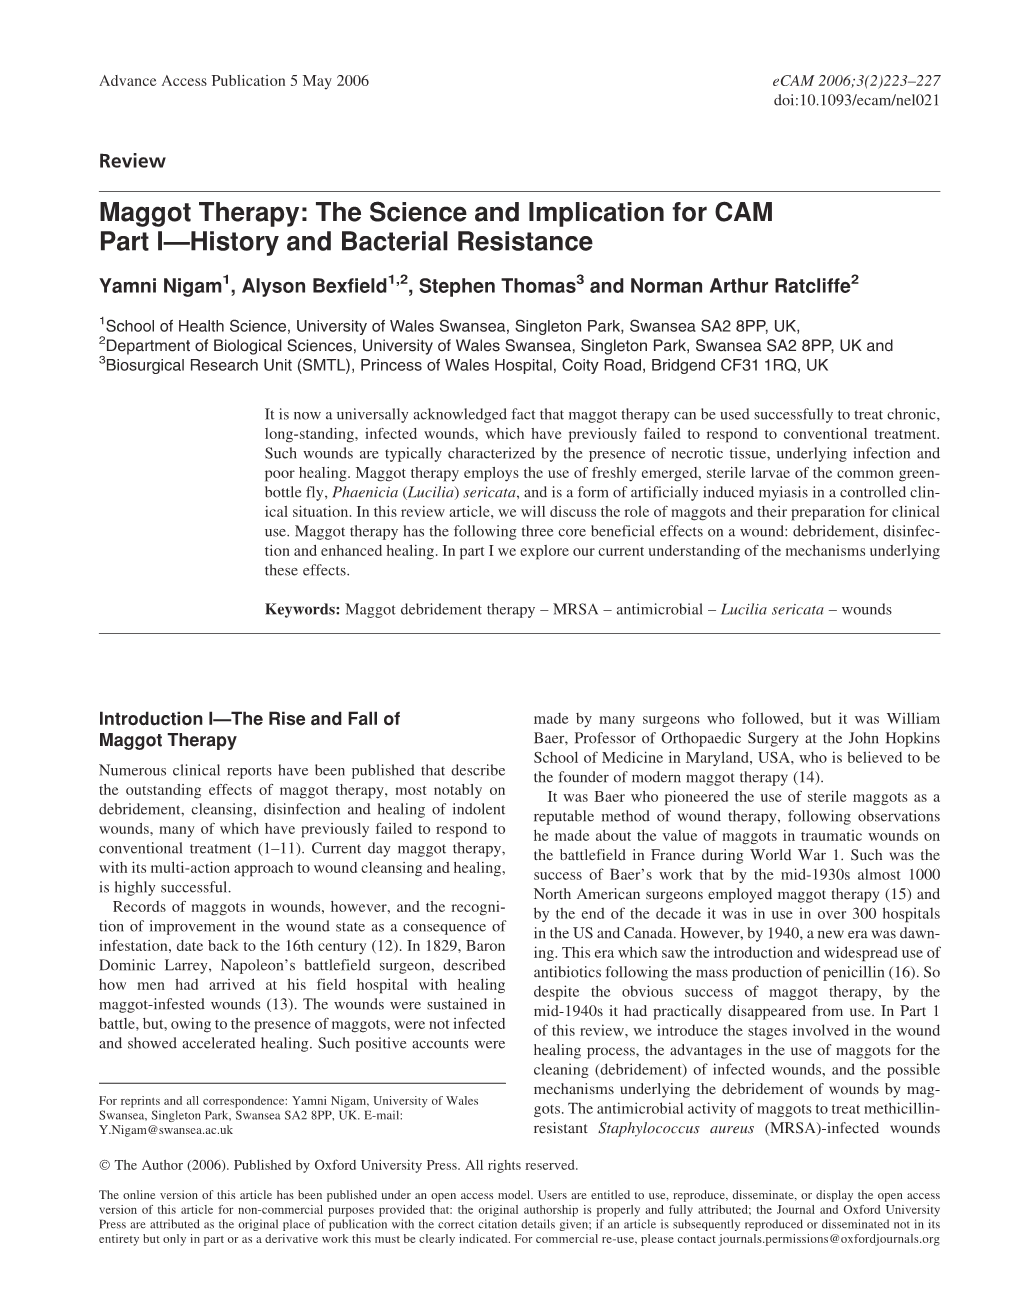 Maggot Therapy: the Science and Implication for CAM Part I—History and Bacterial Resistance